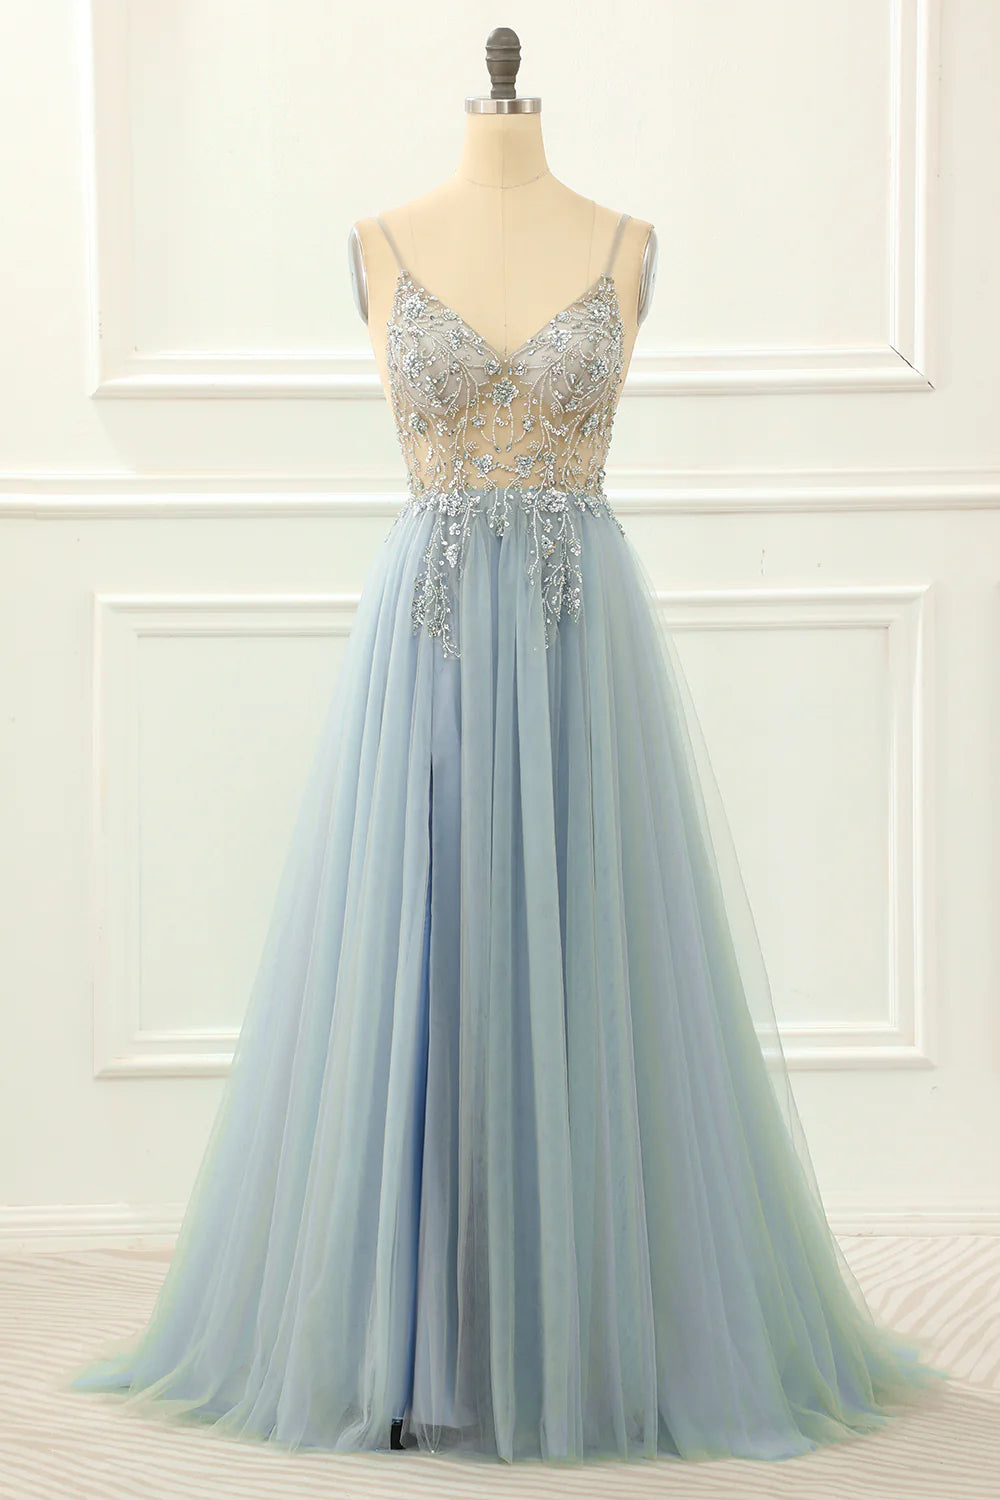 Gorgeous Tulle A-line Spaghetti Straps Long Prom Dress with Beading